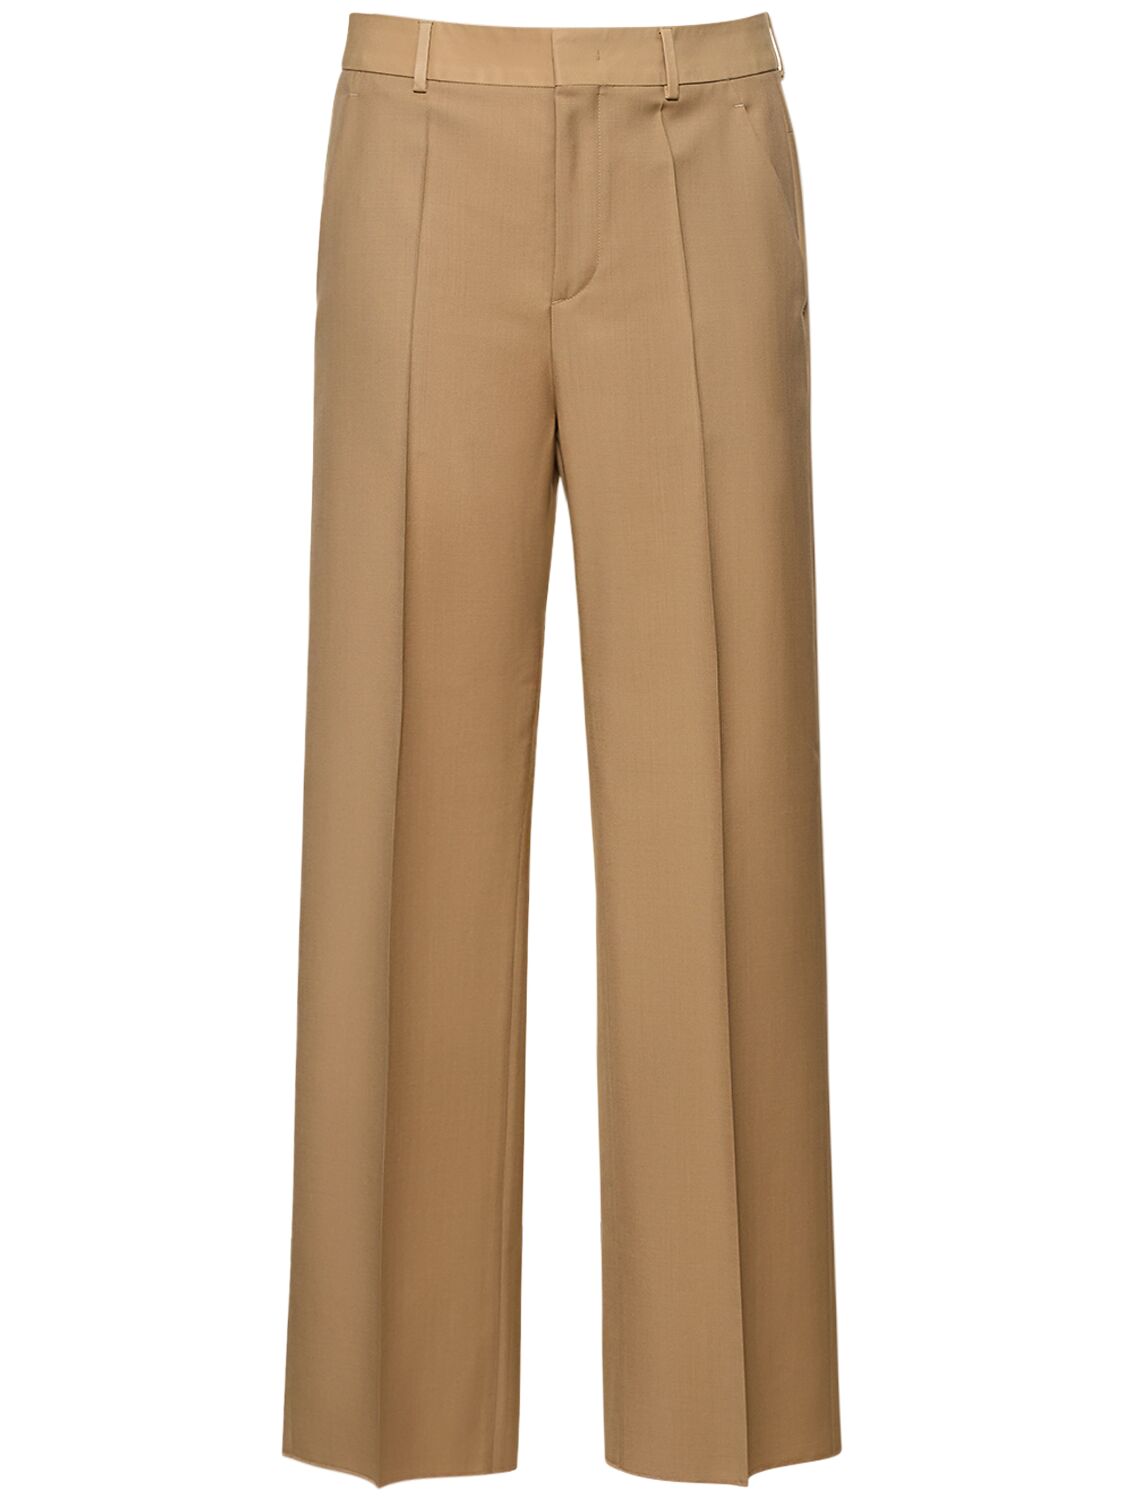 VALENTINO Mohair and Wool Dress Pants